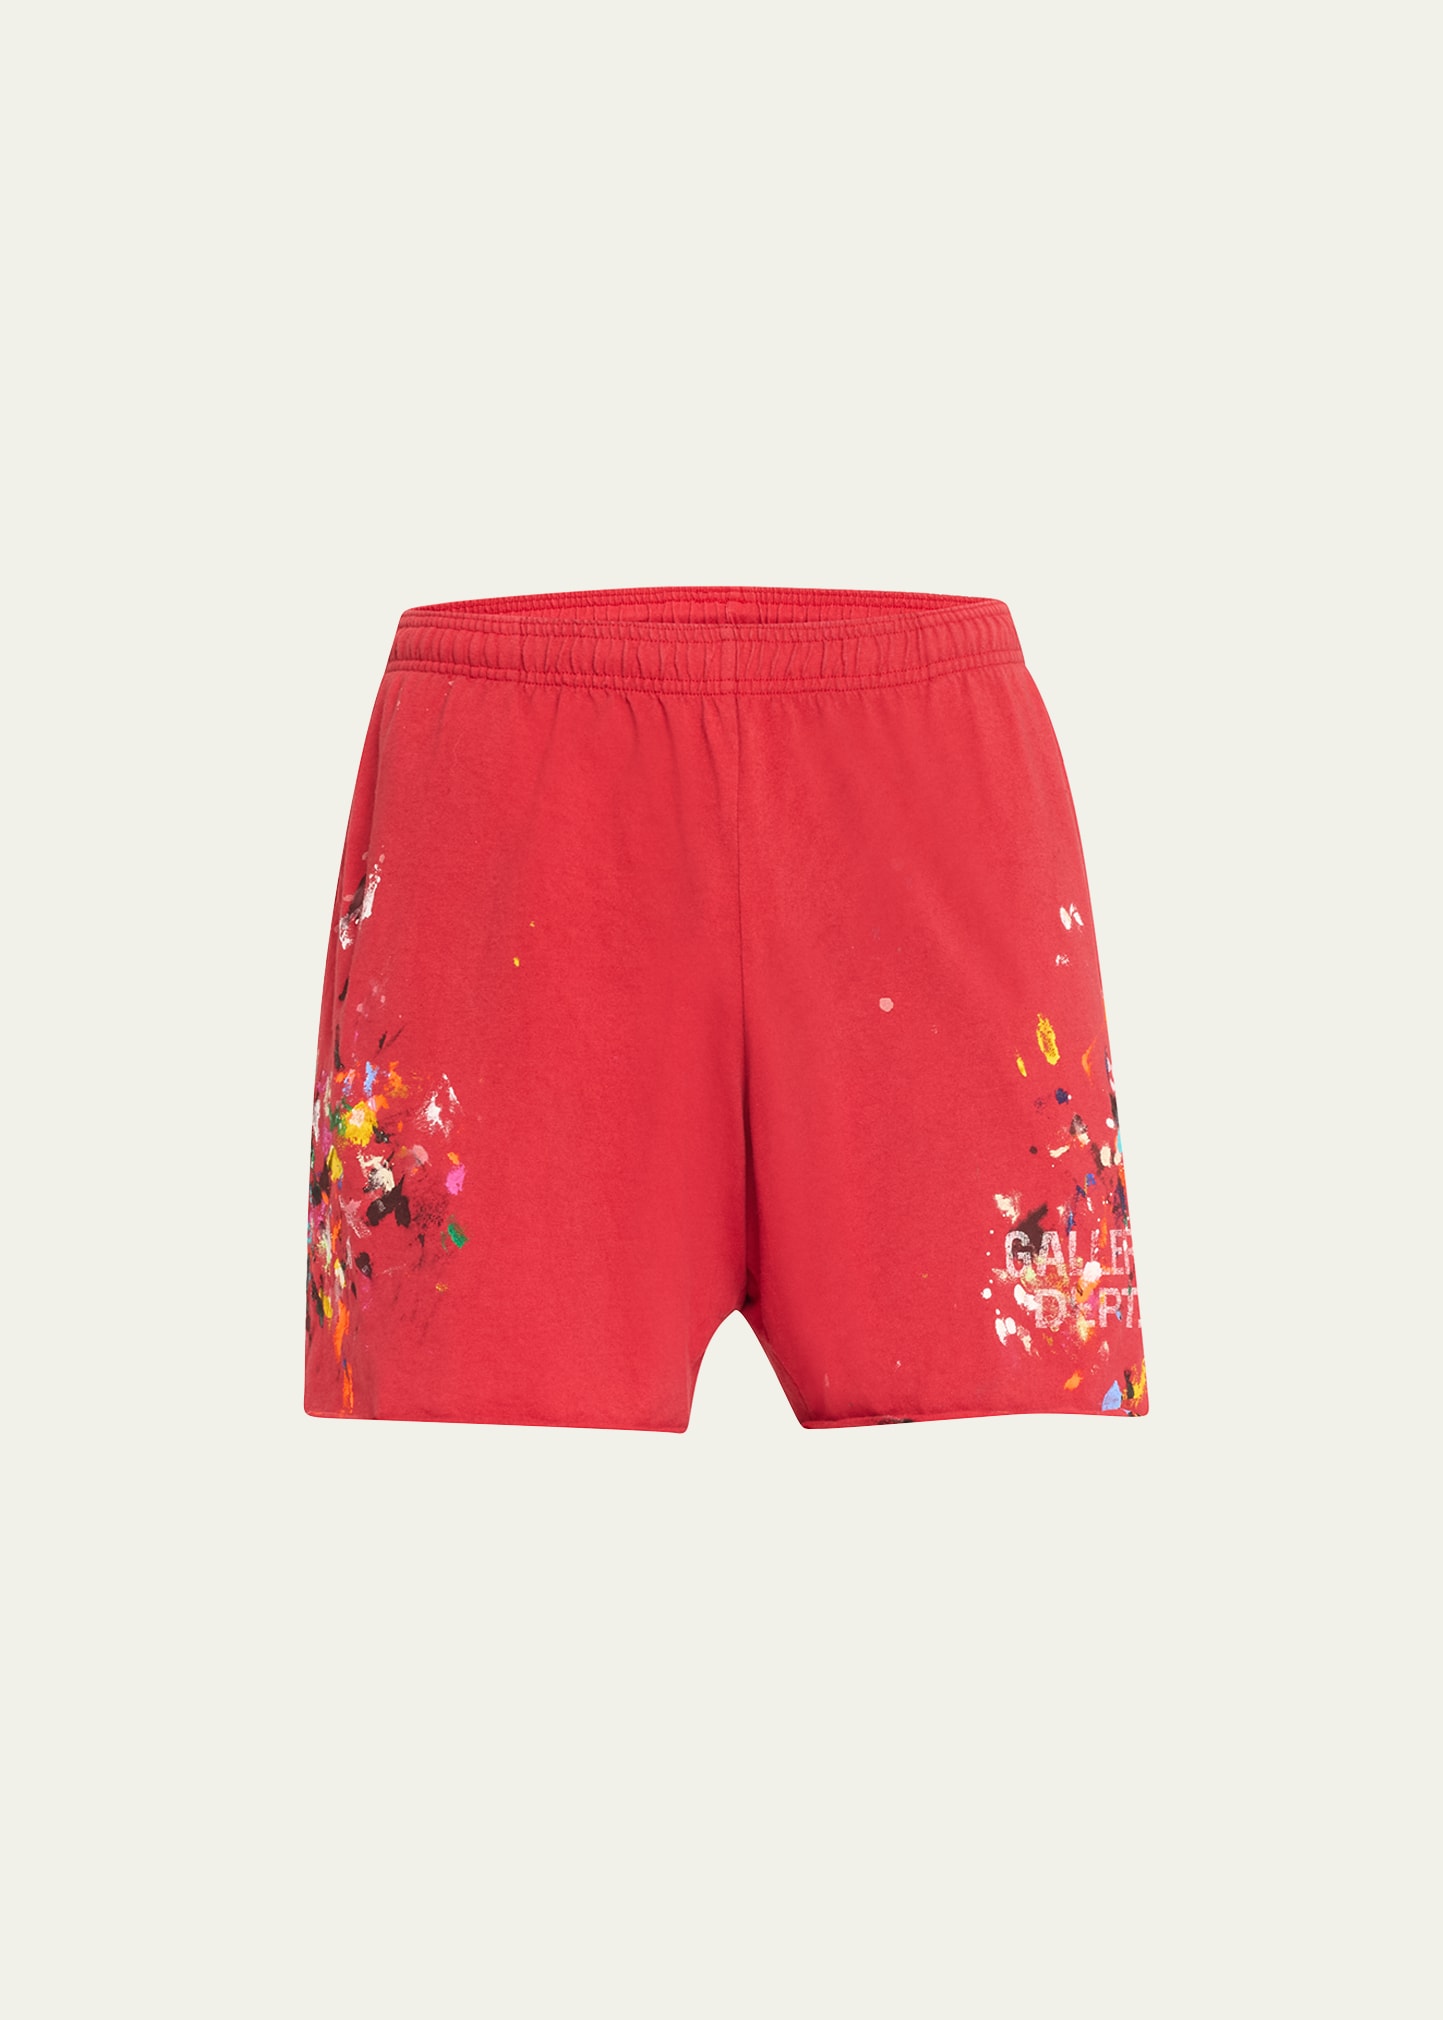 Men's Insomnia Painted Jersey Shorts